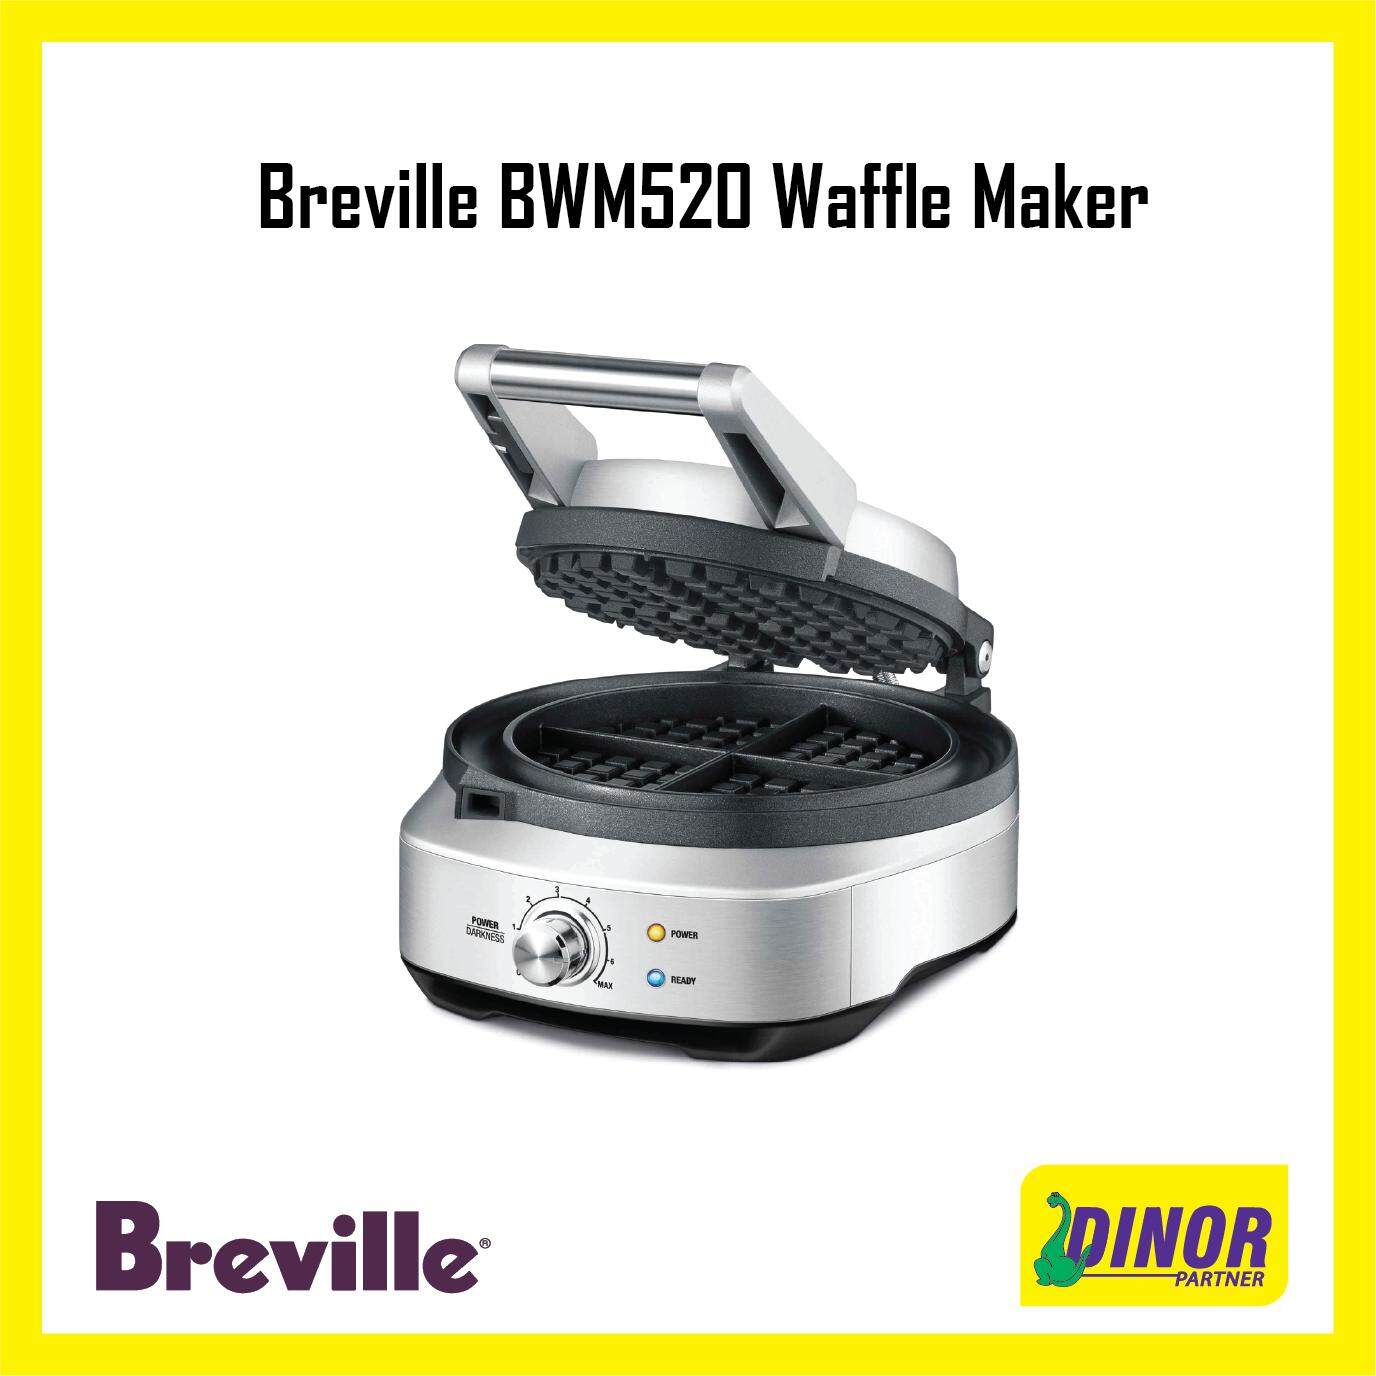 Breville the No-Mess Waffle Maker Classic BWM520